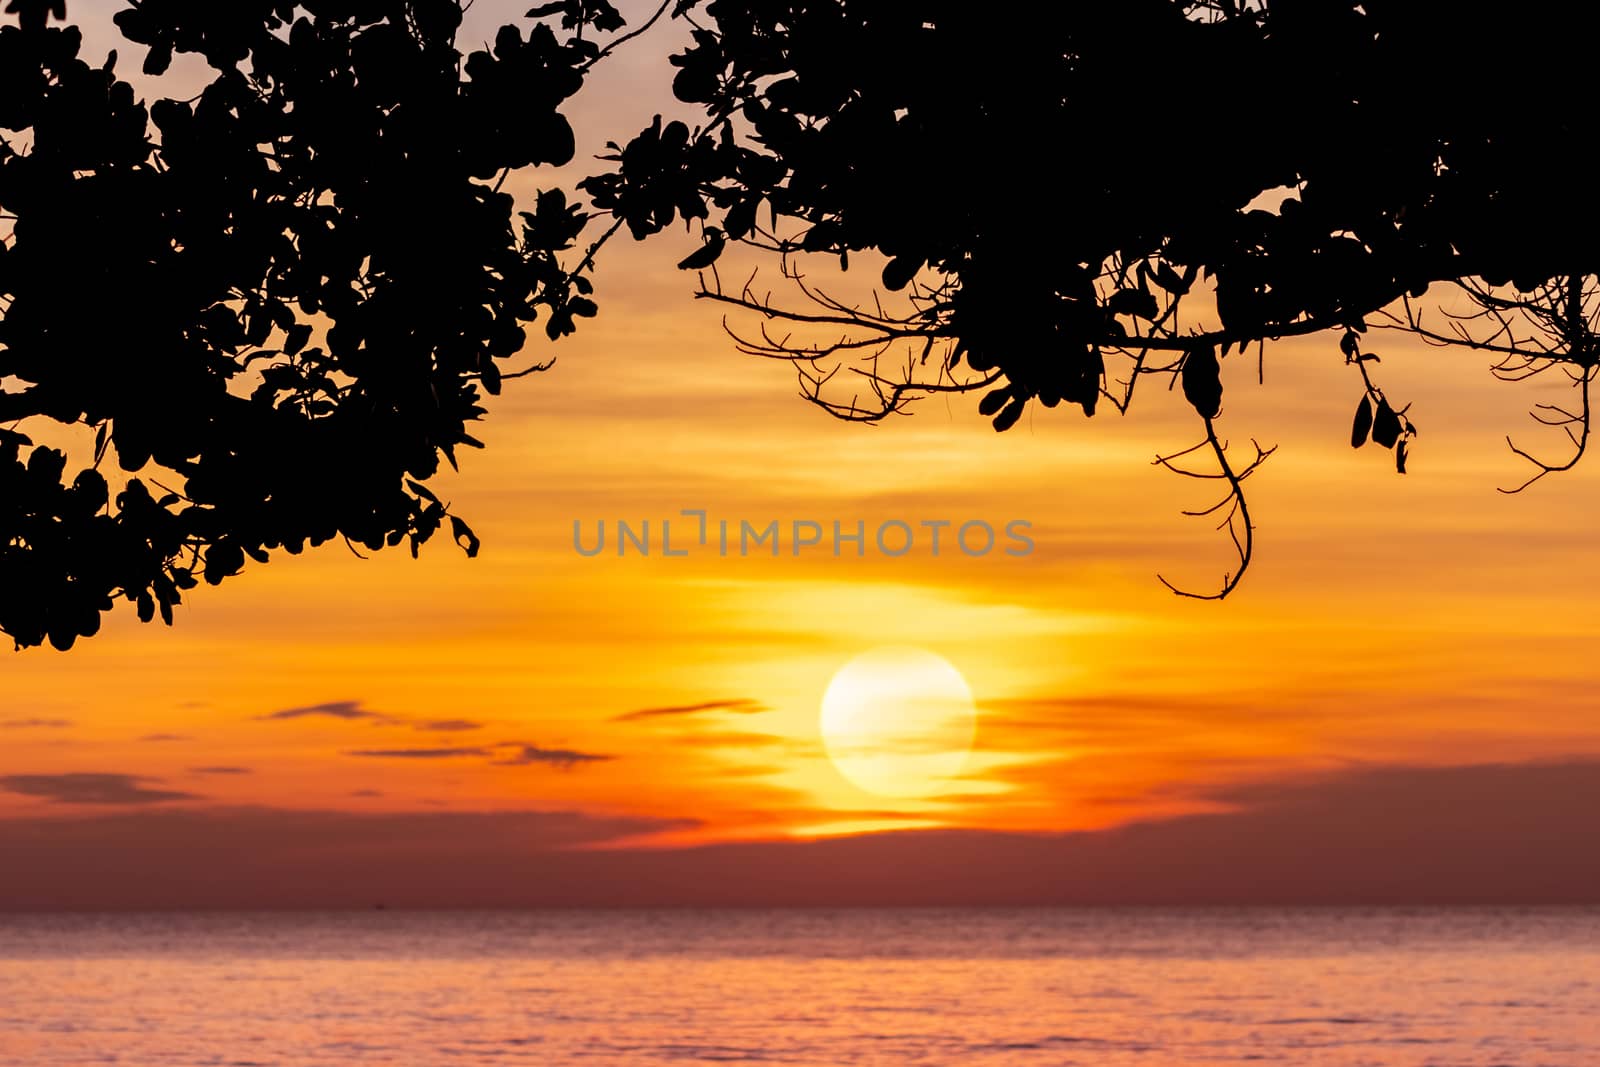 Summer sunset sky at tropical beach. View from under the tree. S by Fahroni